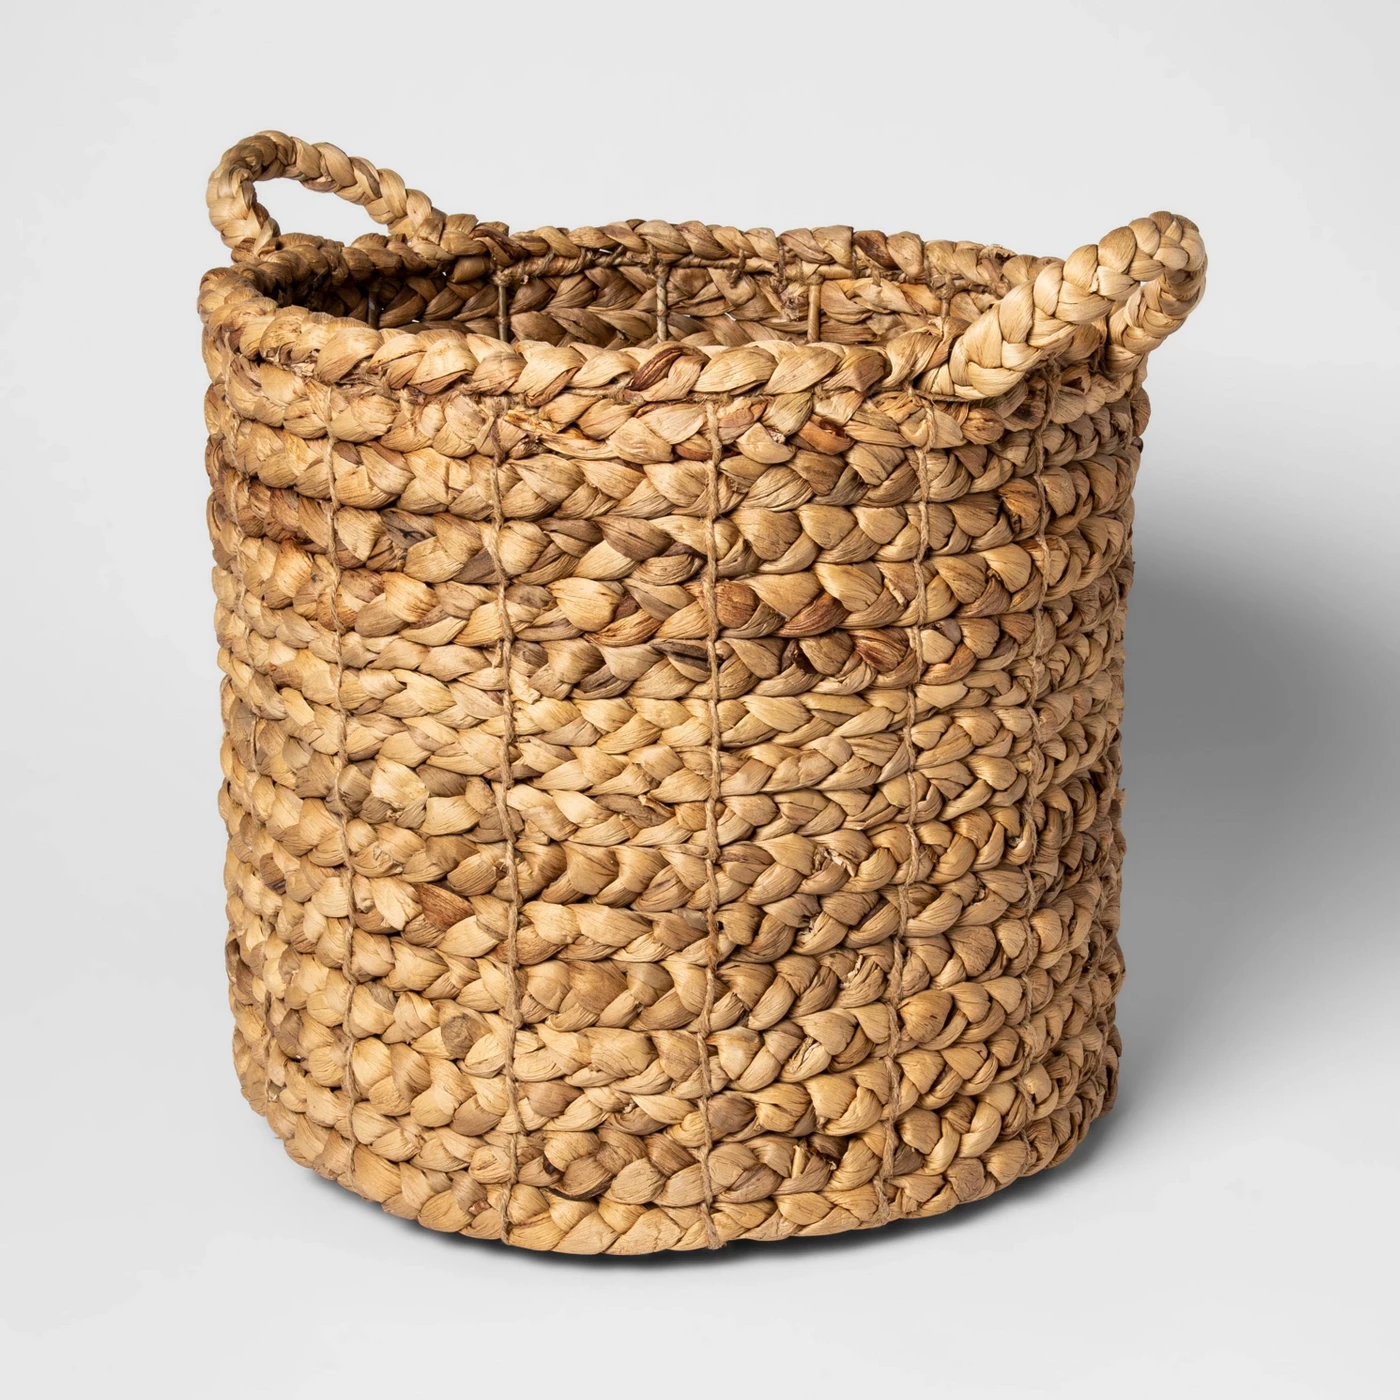 Decorative Basket Natural 13"x14".  Lovely Country French and Euro Country decor and furniture items on Hello Lovely! #frenchfarmhouse #frenchdecor #homedecor #interiordesign #frenchcountry #basket #seagrassbasket